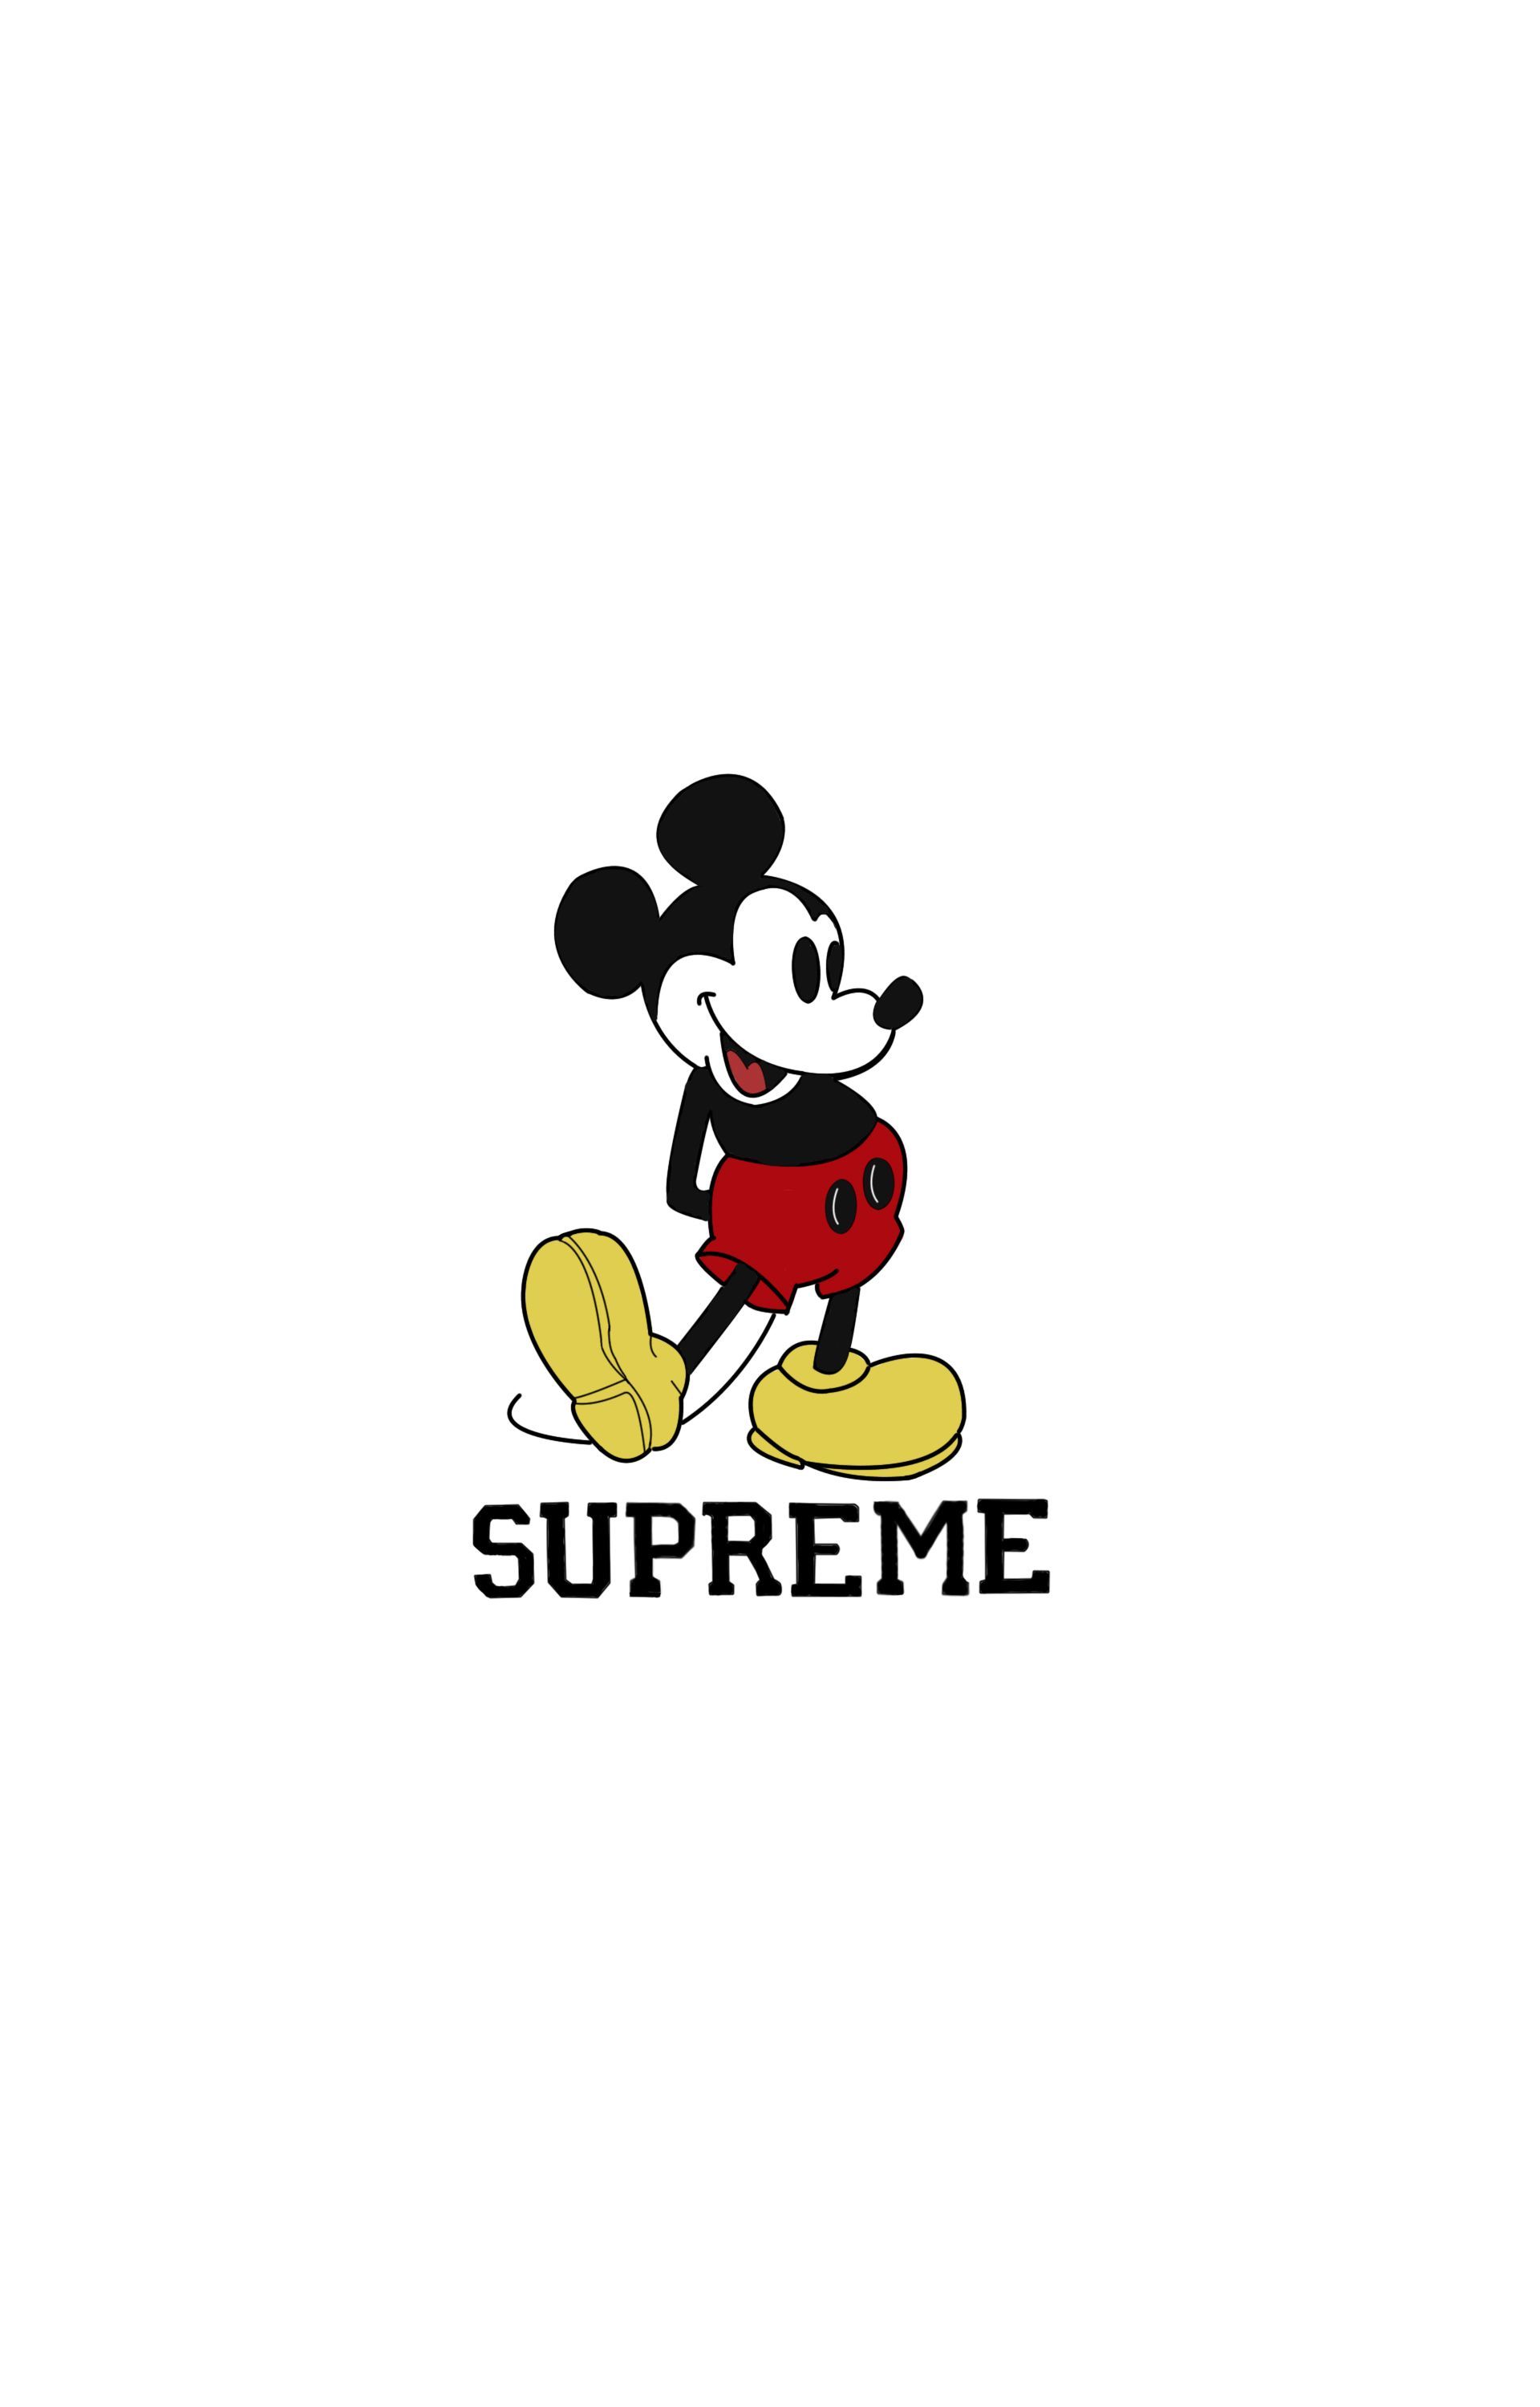 Can Someone Make An iPhone Wallpaper Of The Supreme